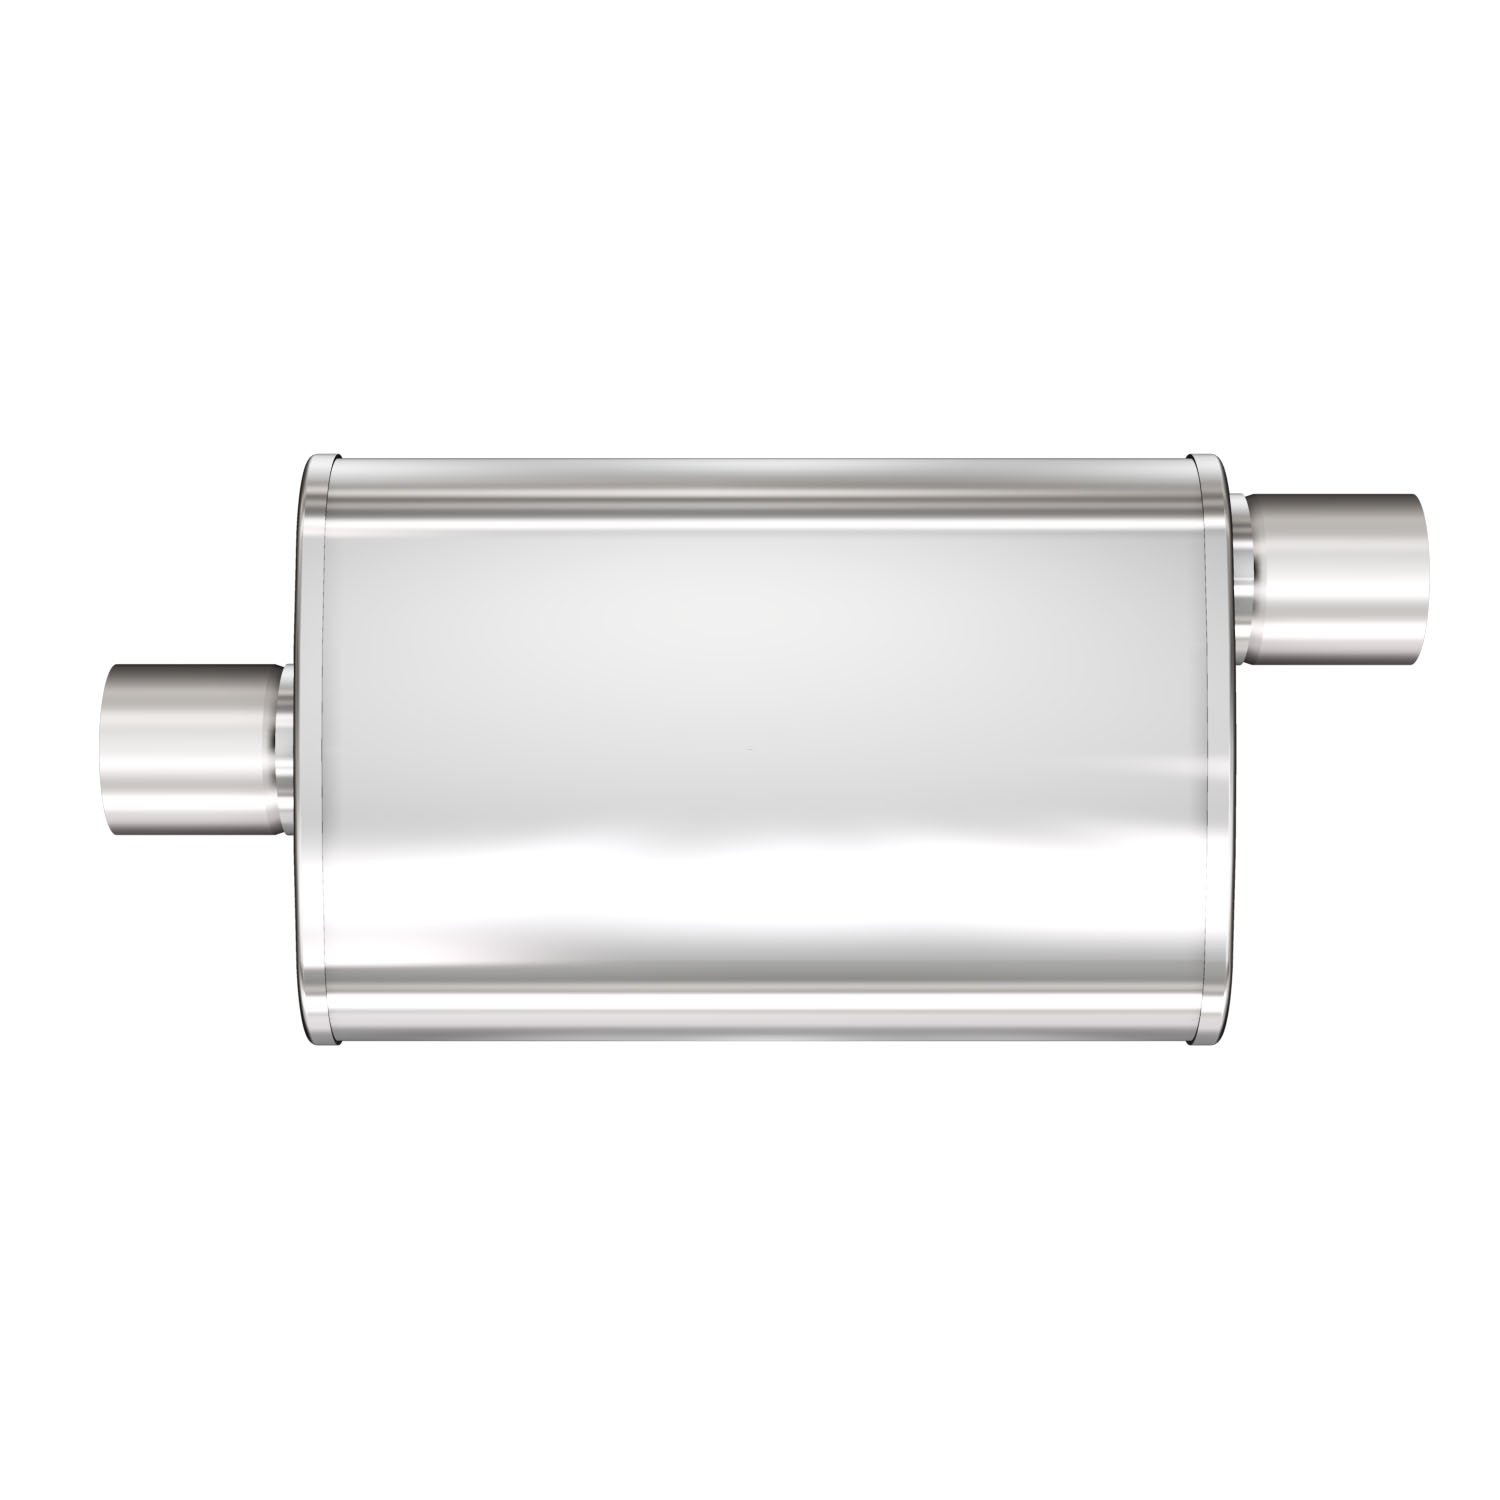 4" x 9" Oval XL 3-Chamber Muffler Center In/Offset Out: 2.25"/2.25" Body Length: 18" Overall Length: 24" Satin Finish